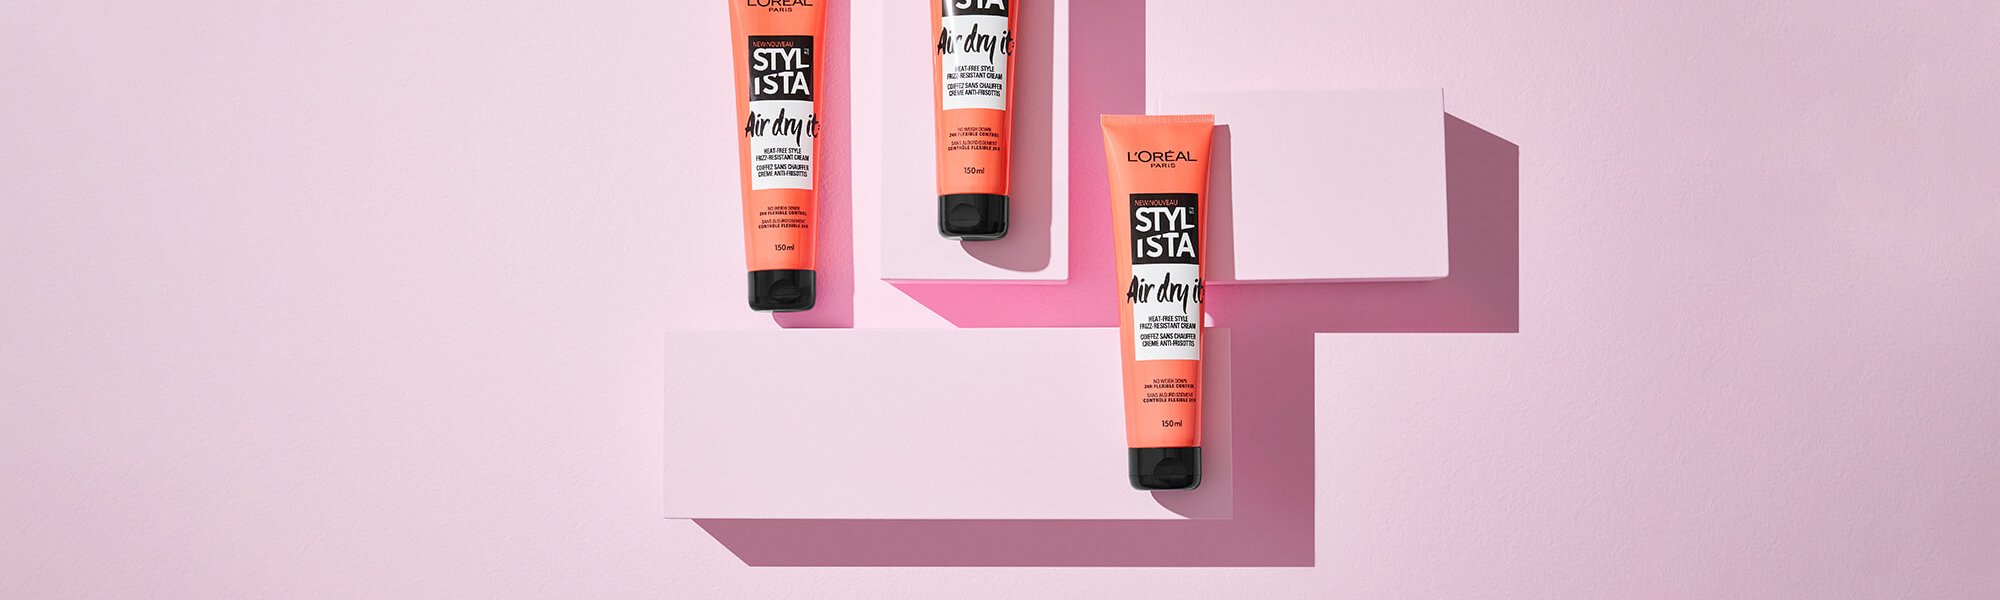 Quick And Easy Tips To Elevate Your Work From Home Look With Stylista Air Dry It